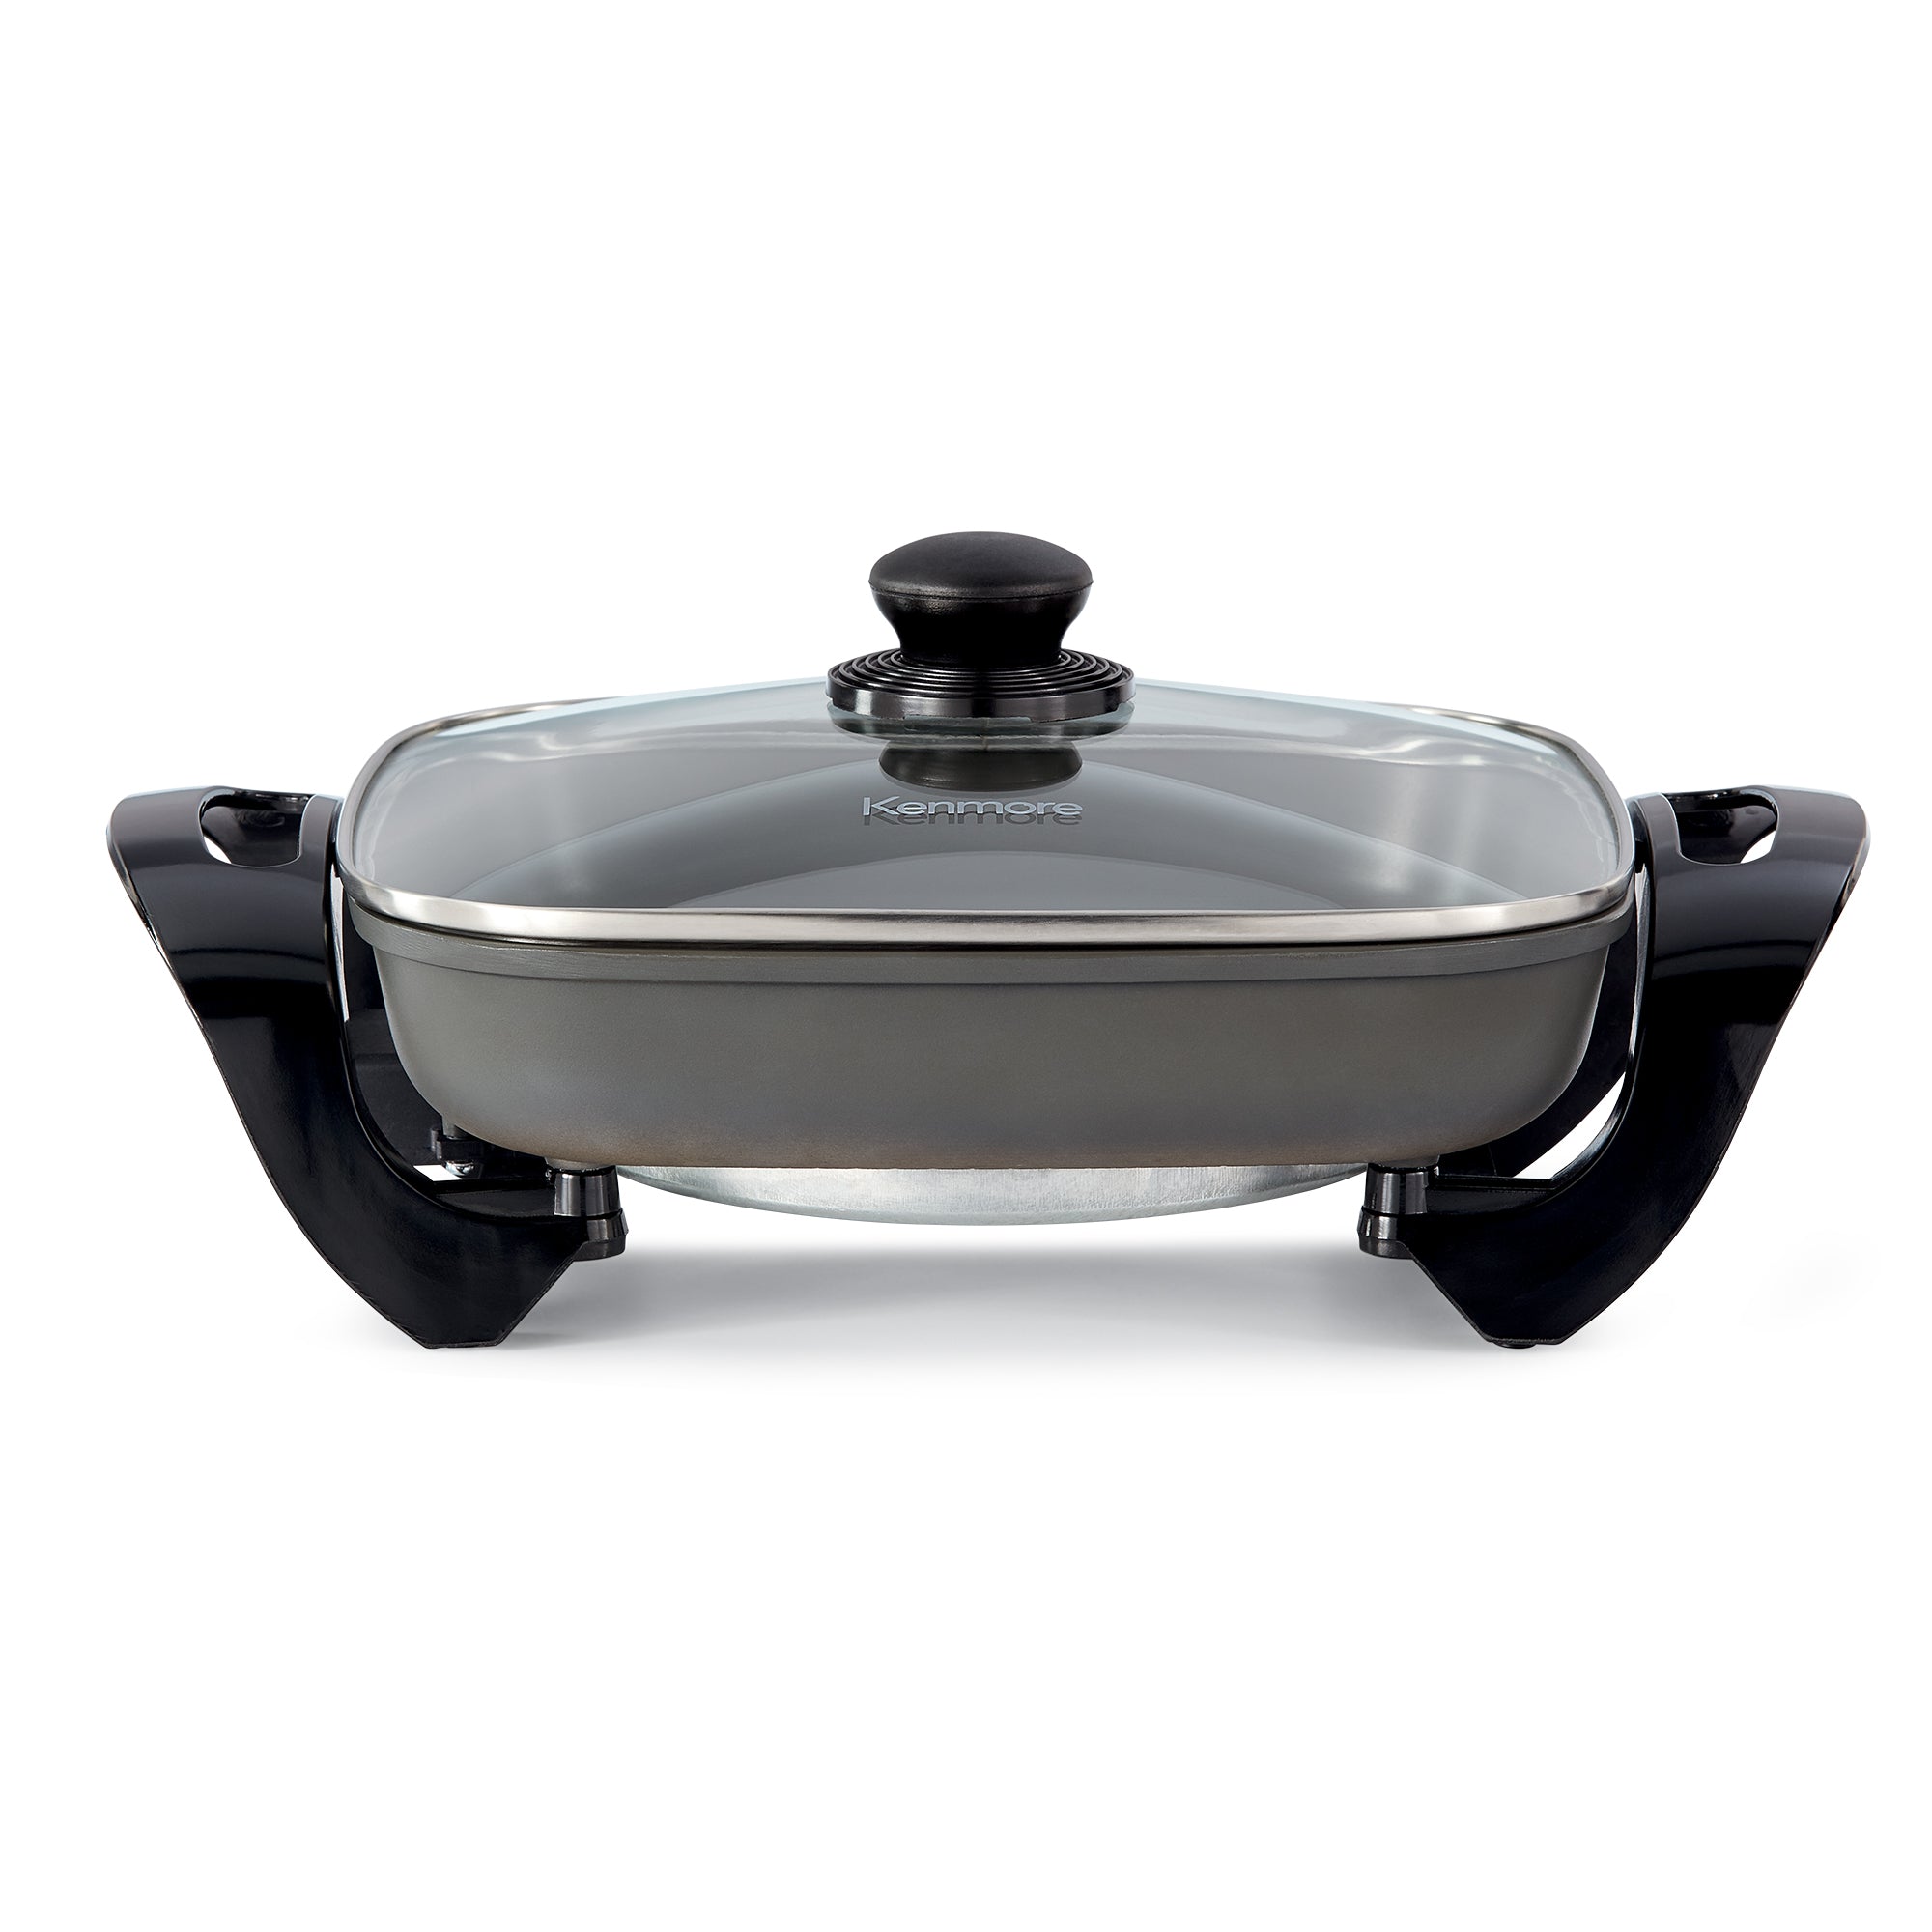 Kenmore non-stick electric skillet with glass lid on a white background